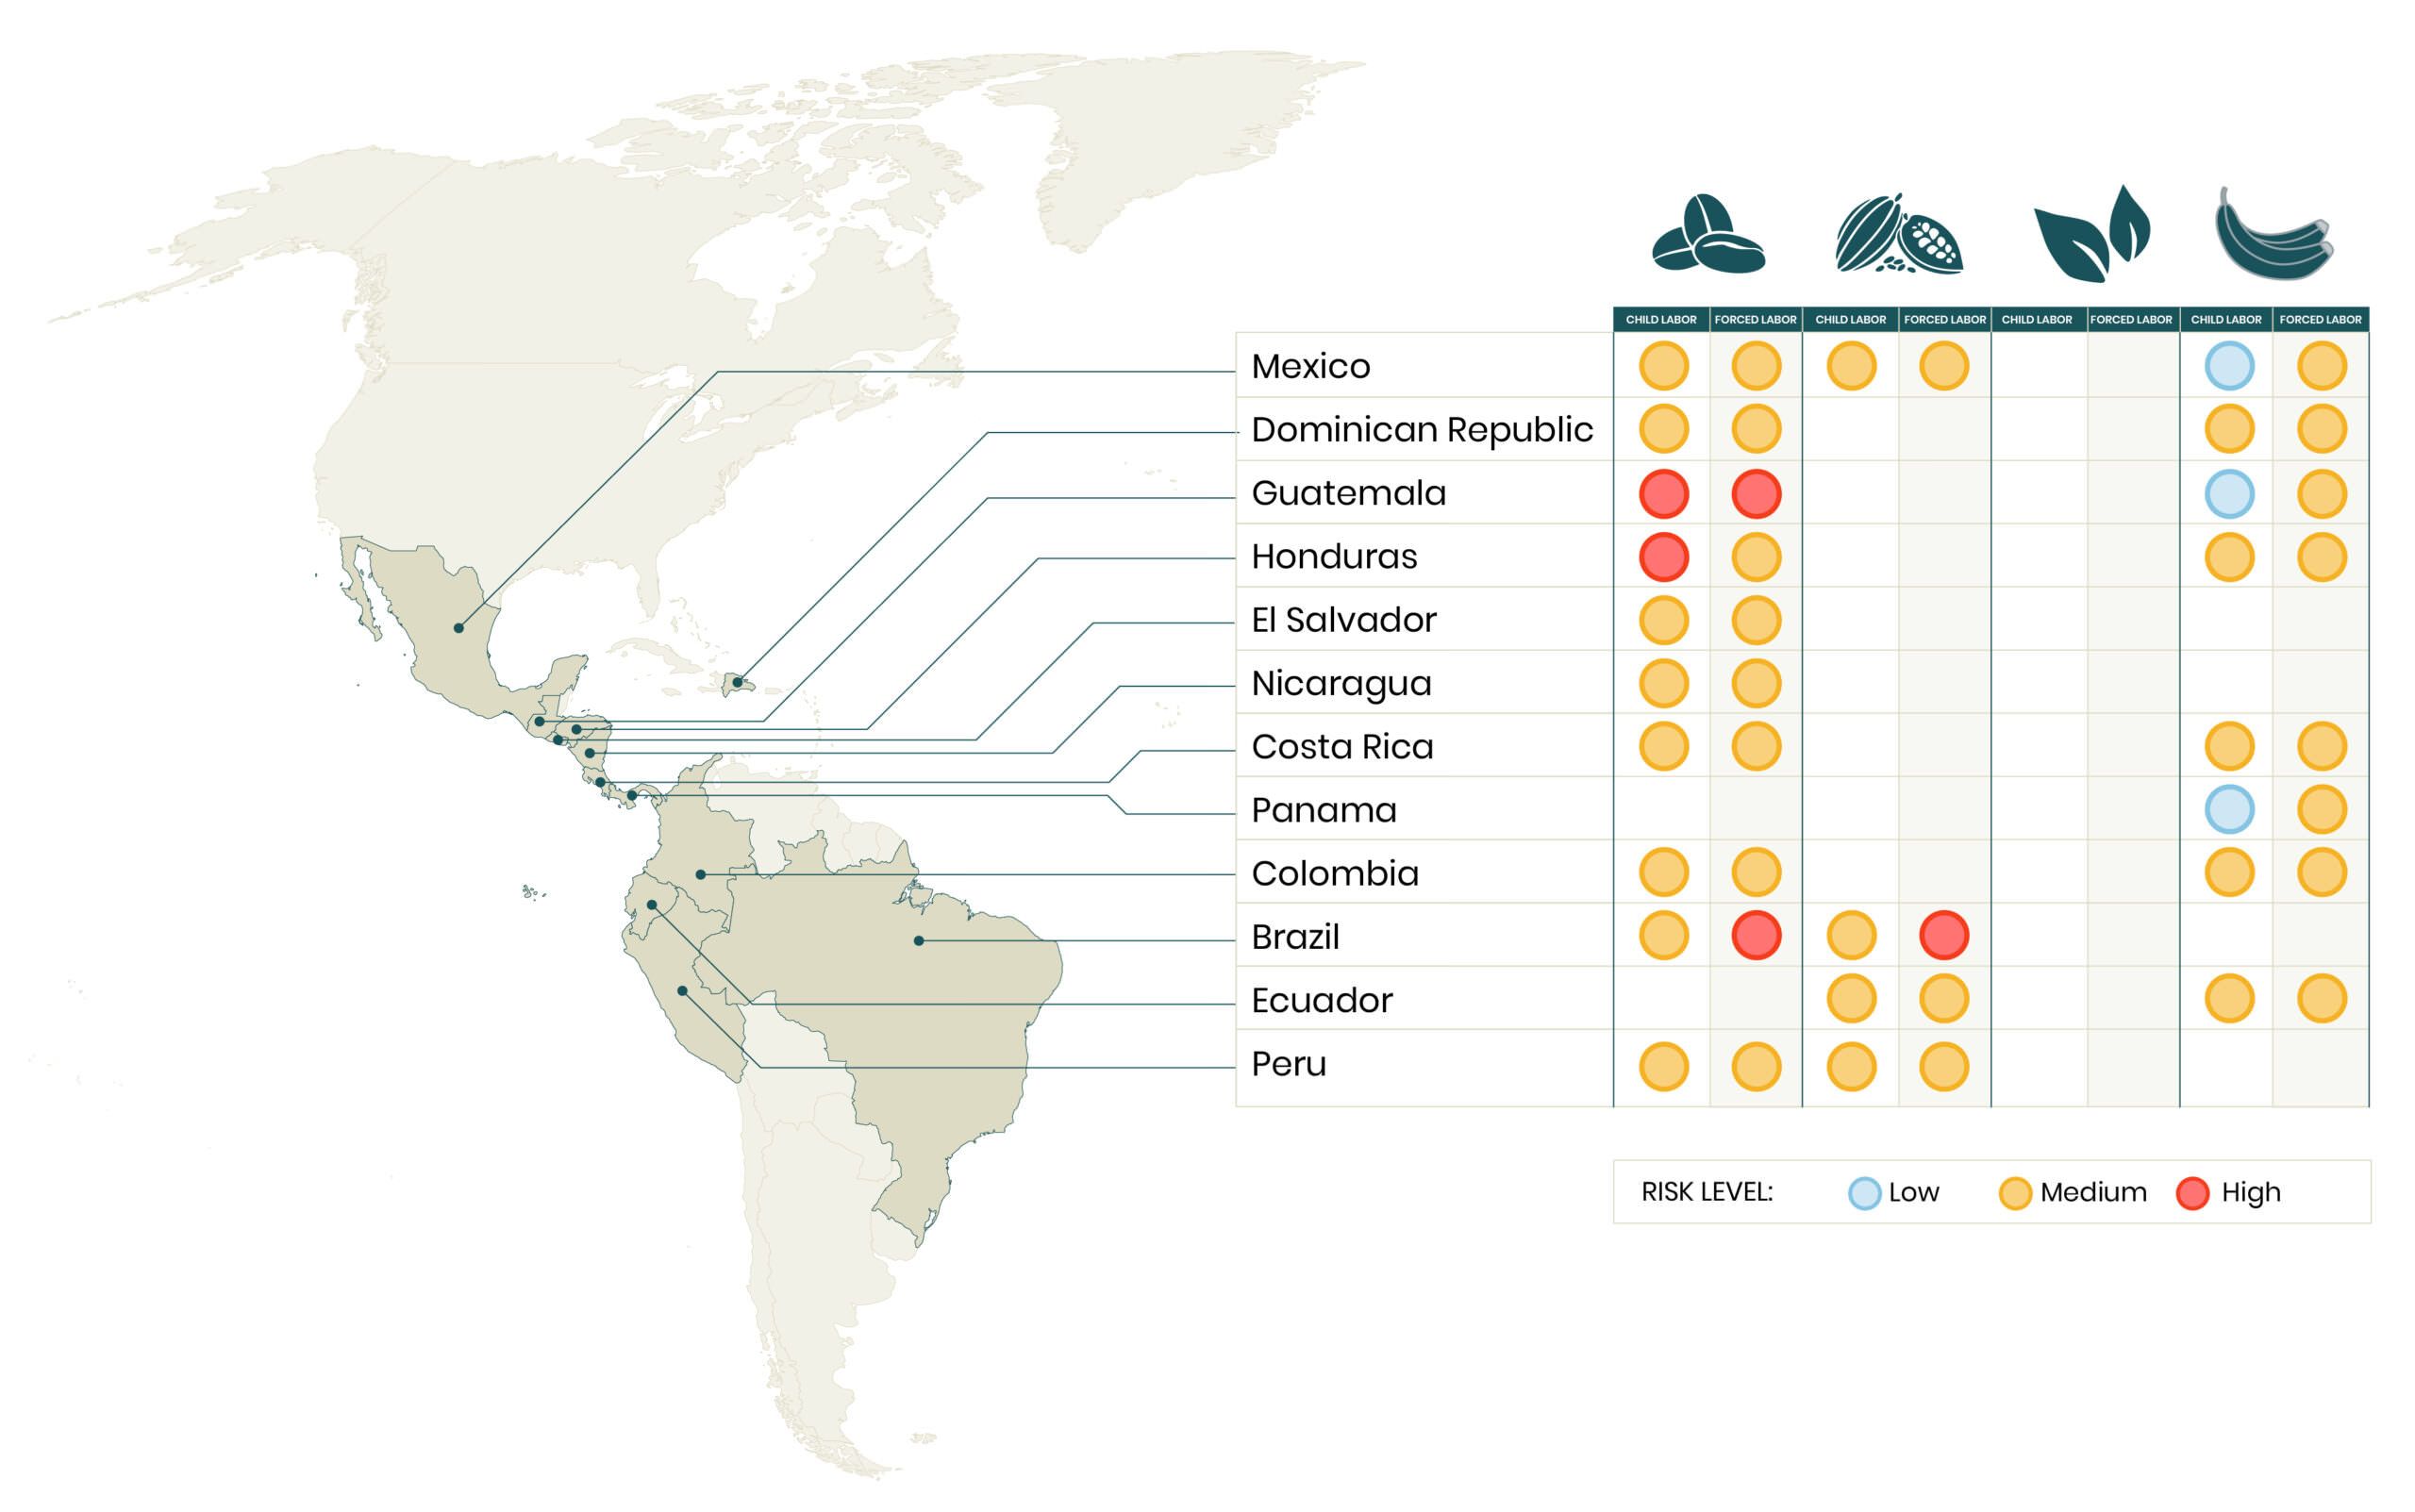 Risk map for child labor and forced labor in Latin America